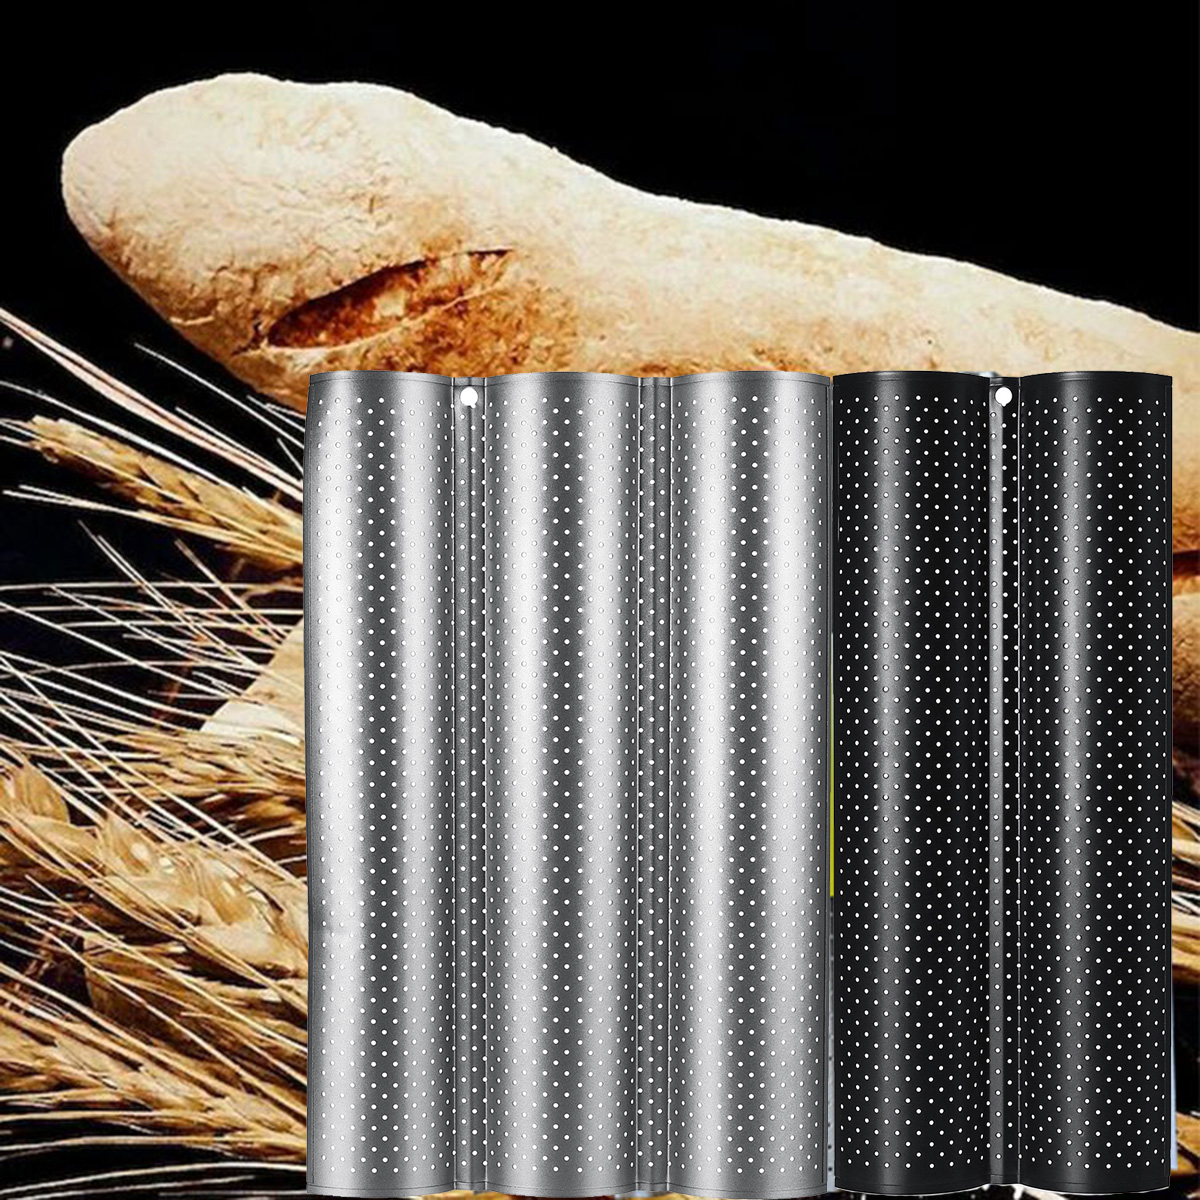 23-Grooves-Alloy-Non-Stick-French-Bread-Baking-Tray-Baguette-Pan-Tin-Tray-Bakeware-Mold-1393436-5